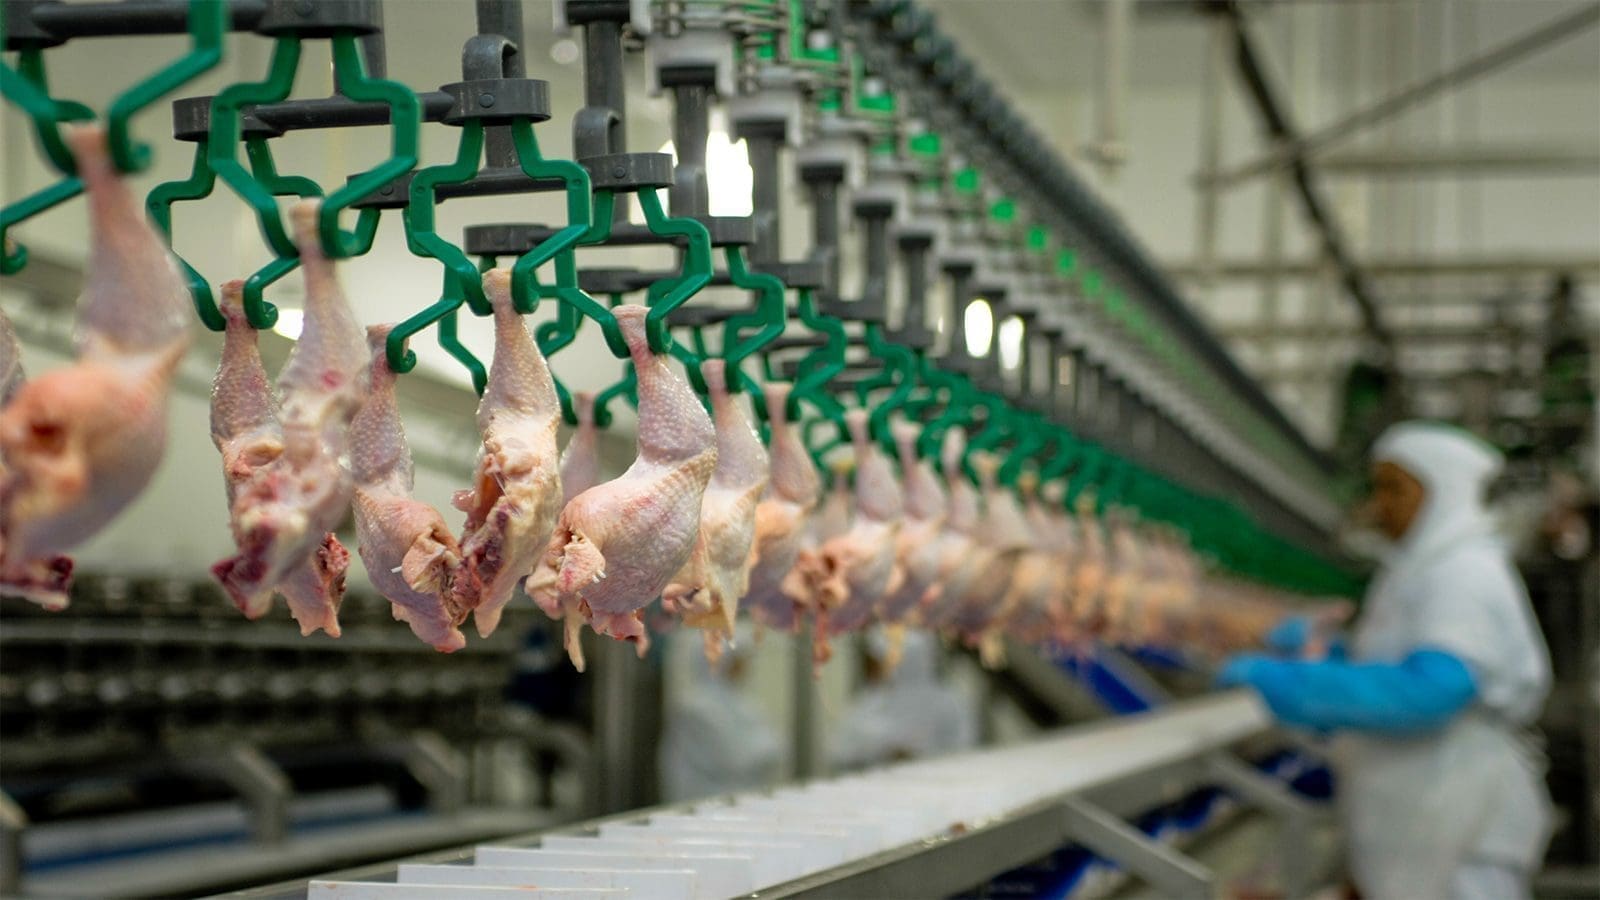 Food Standards Australia New Zealand seeks comments on new poultry antimicrobial treatment